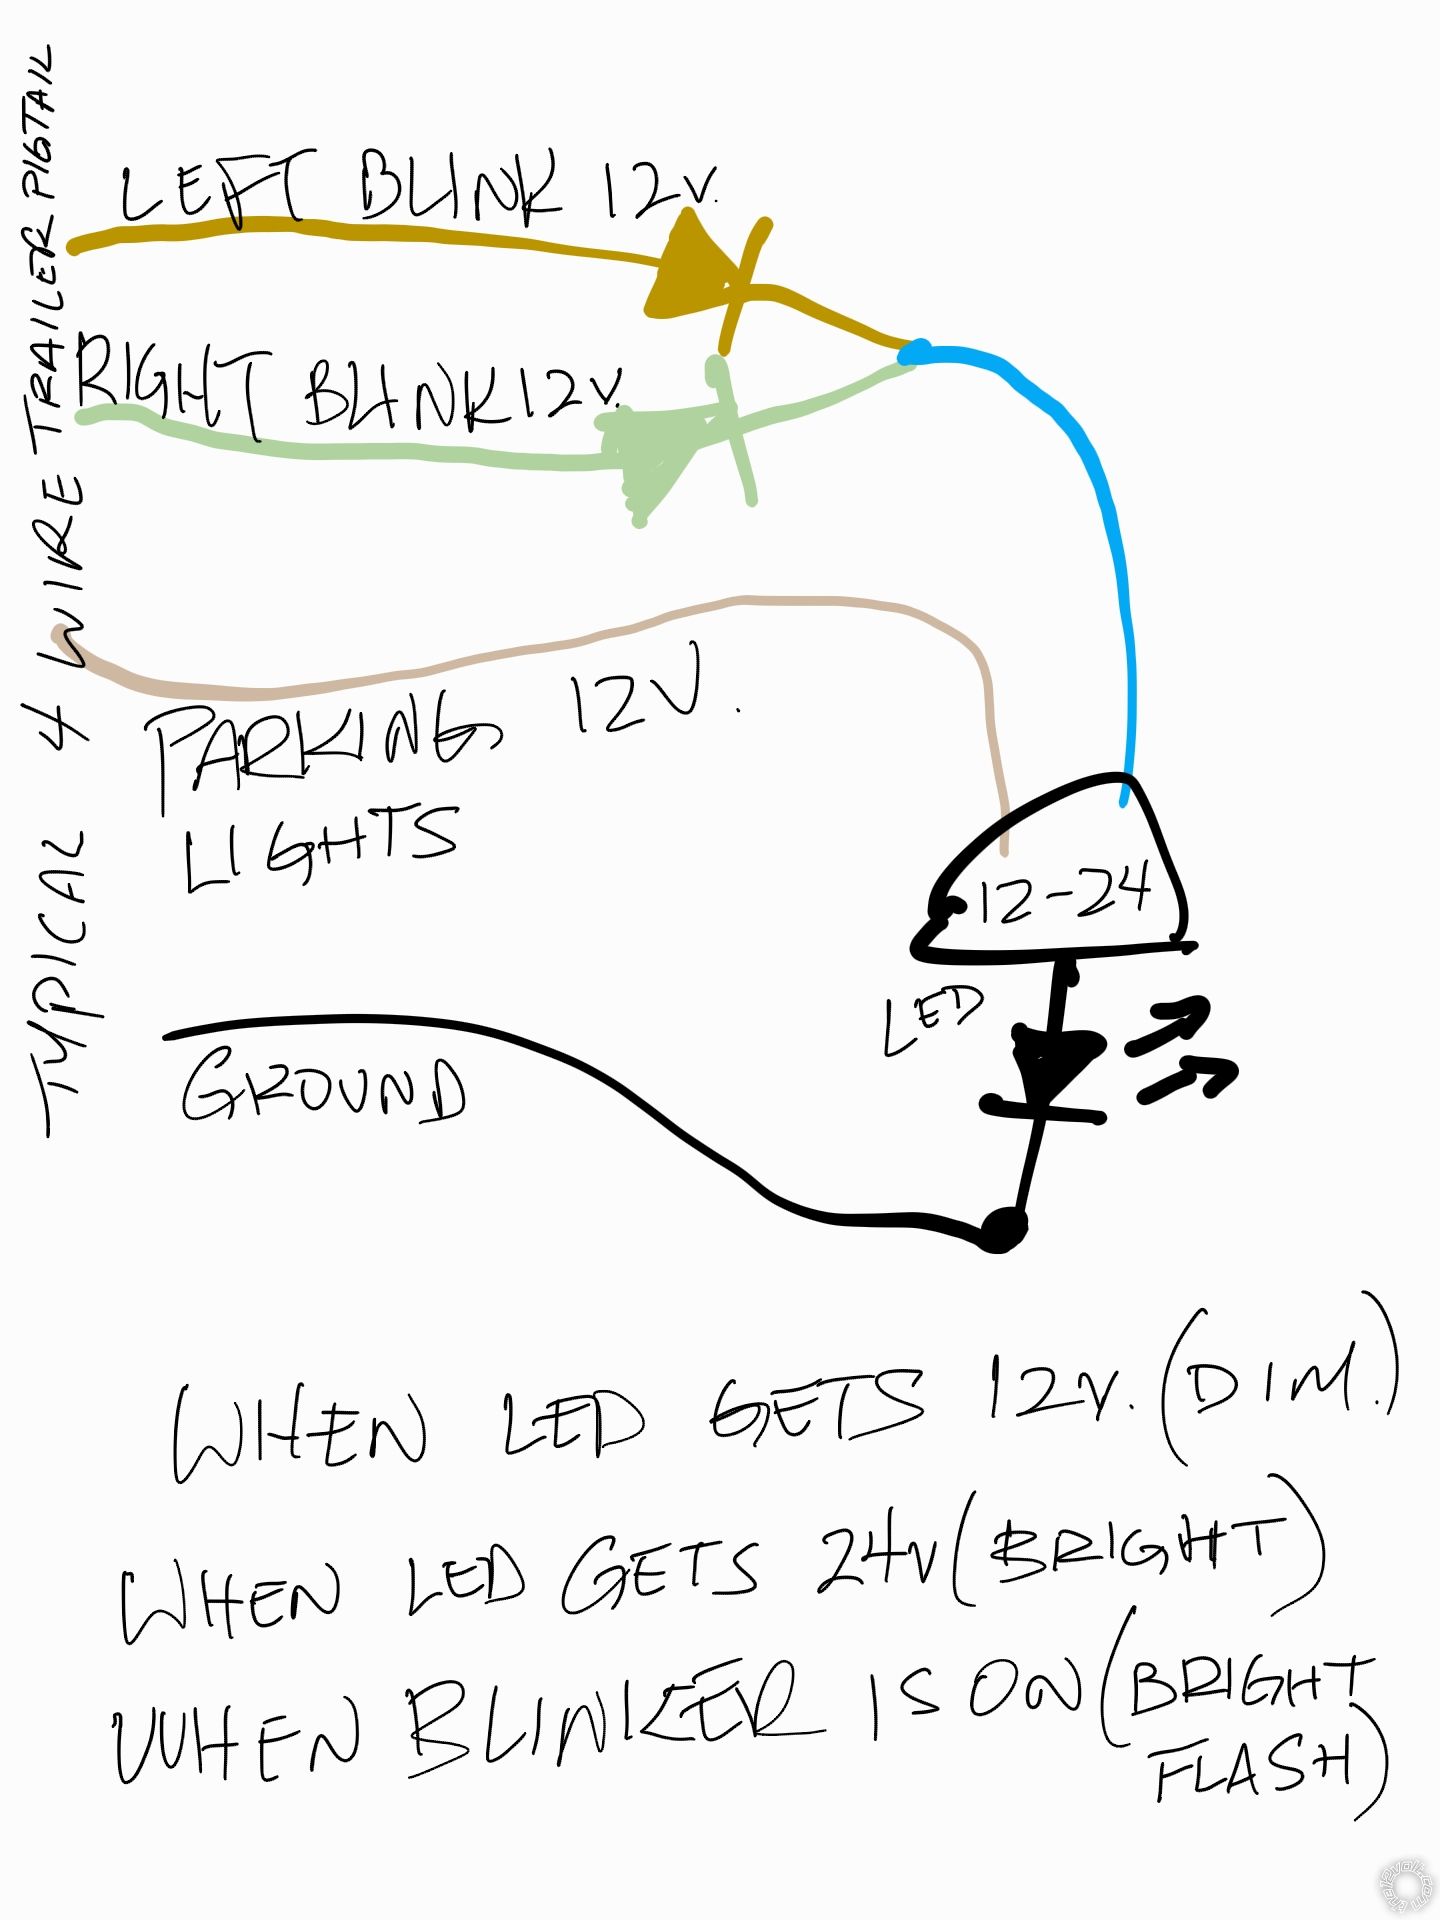 Two 12V Signals to Allow 12V to Pass? - Last Post -- posted image.